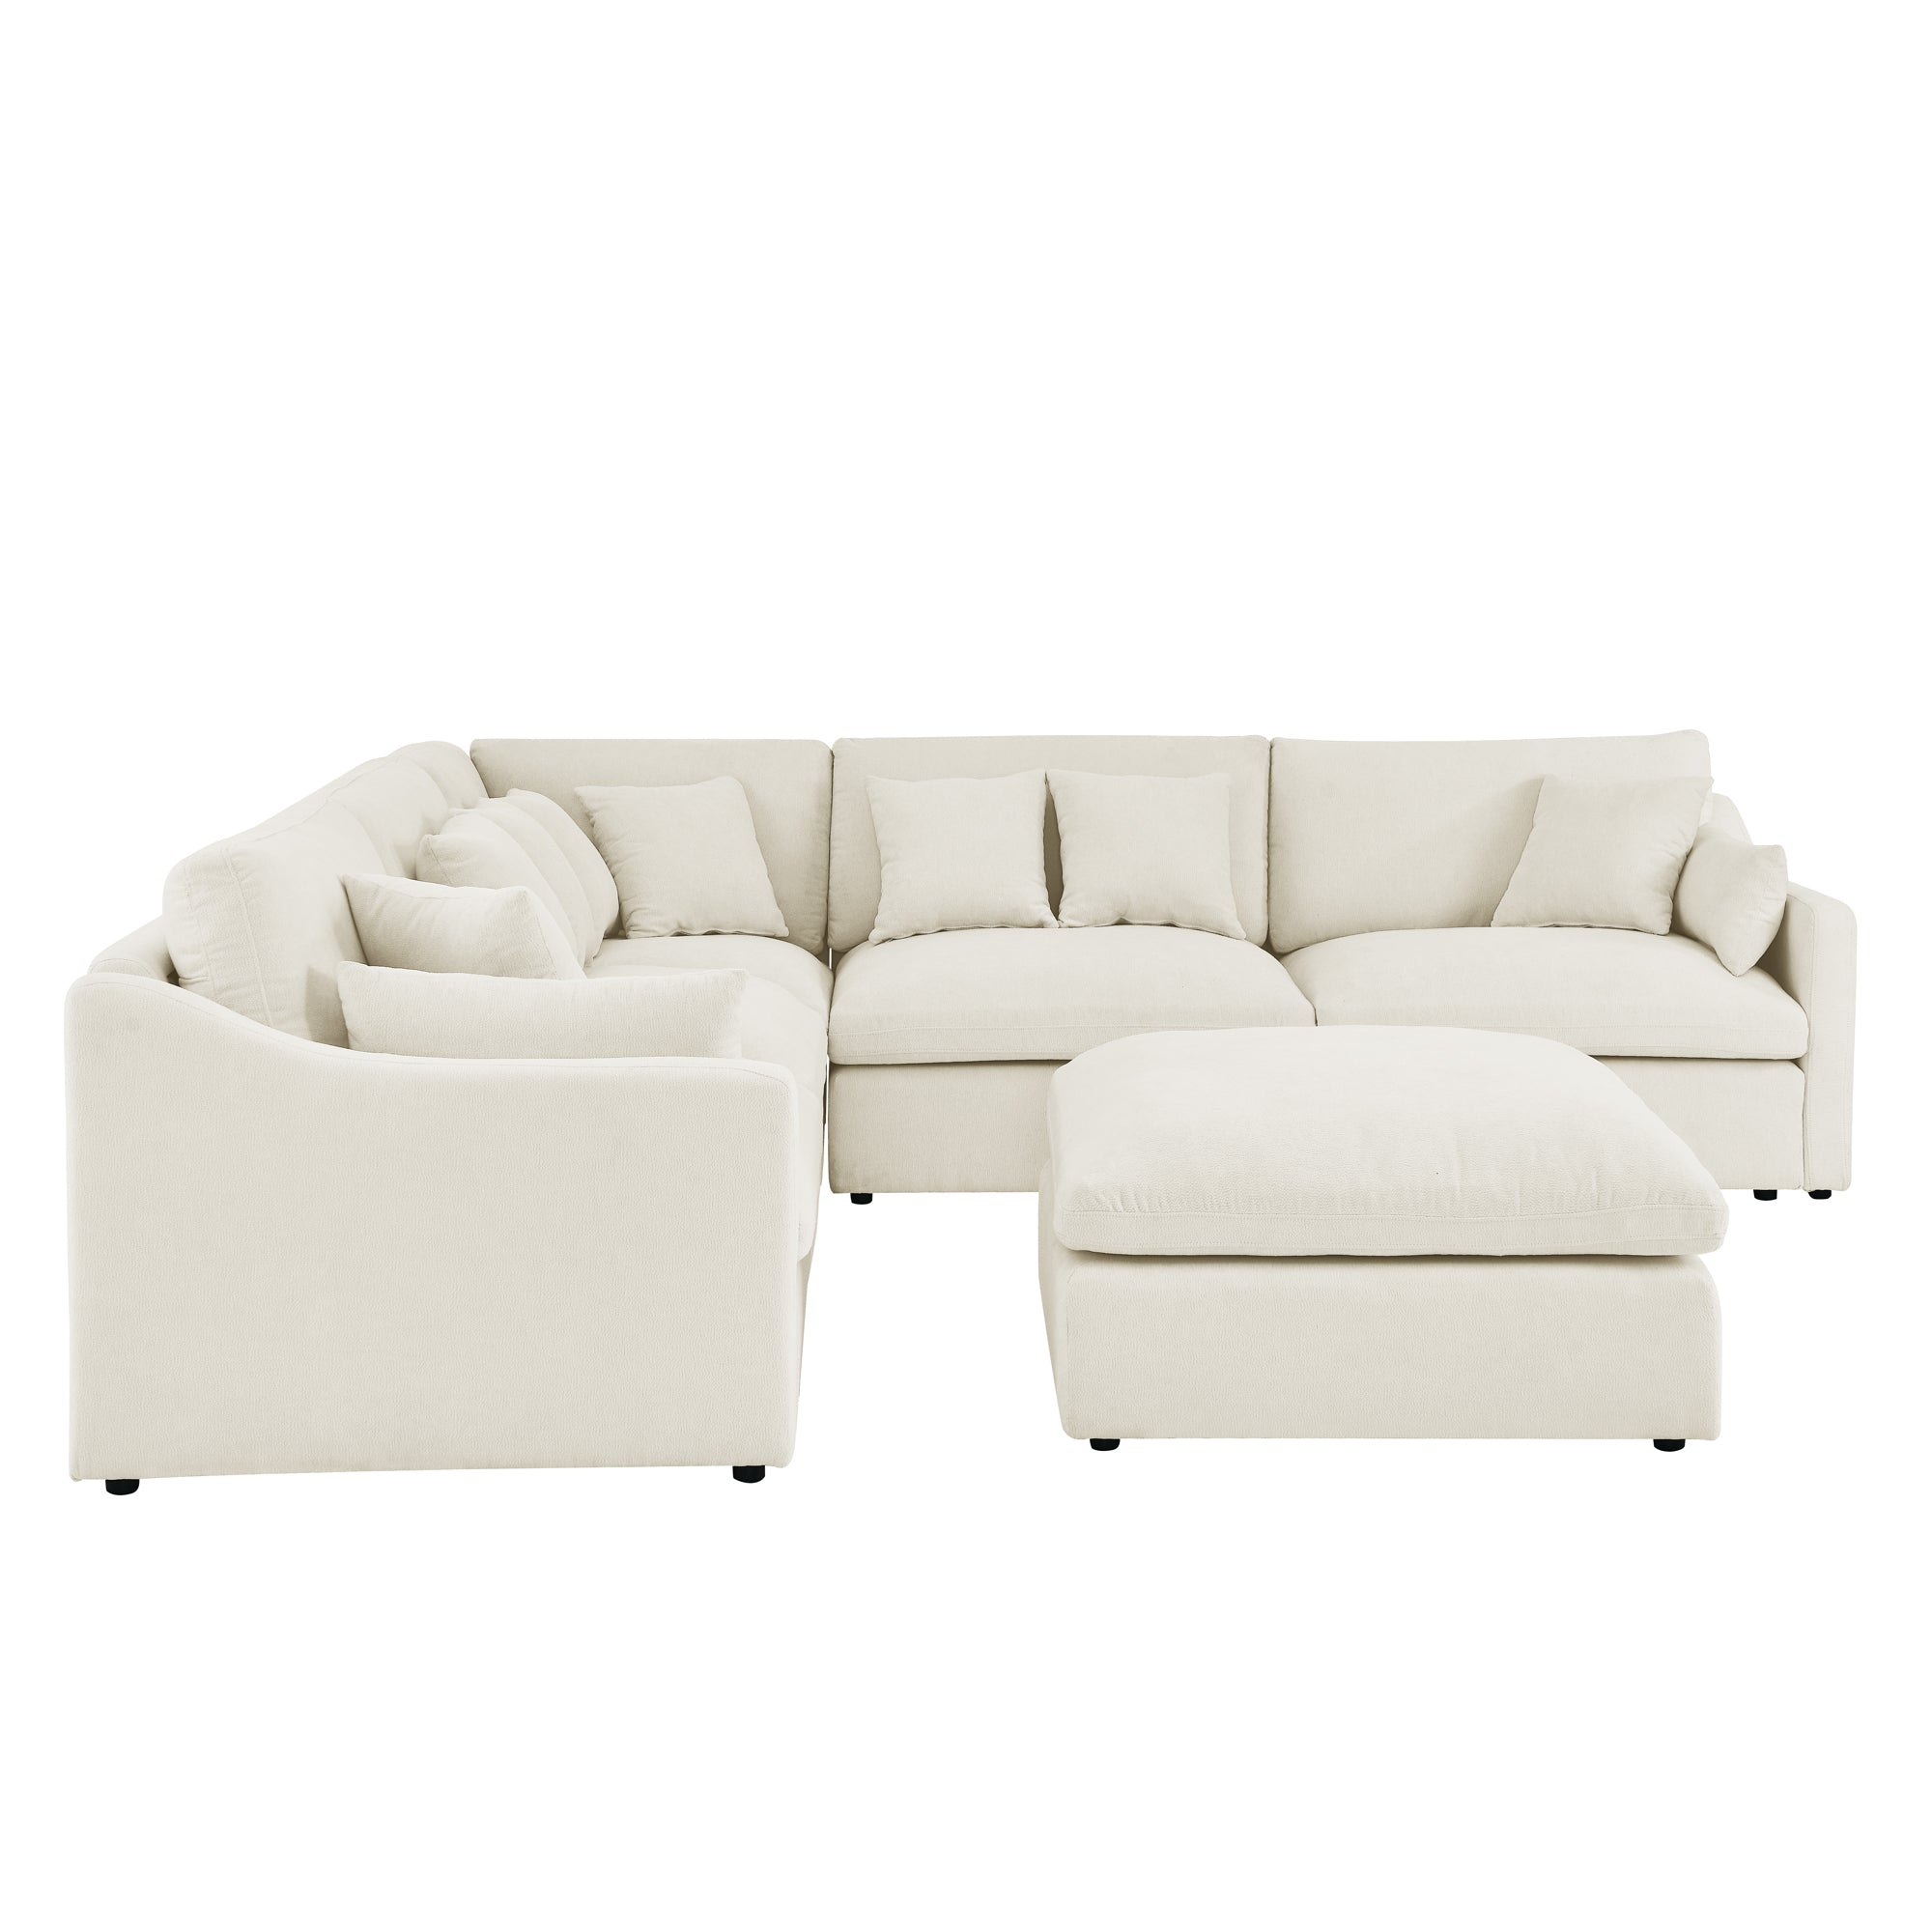 6 Seats Modular L Shaped Sectional Sofa with beige-chenille-wood-primary living